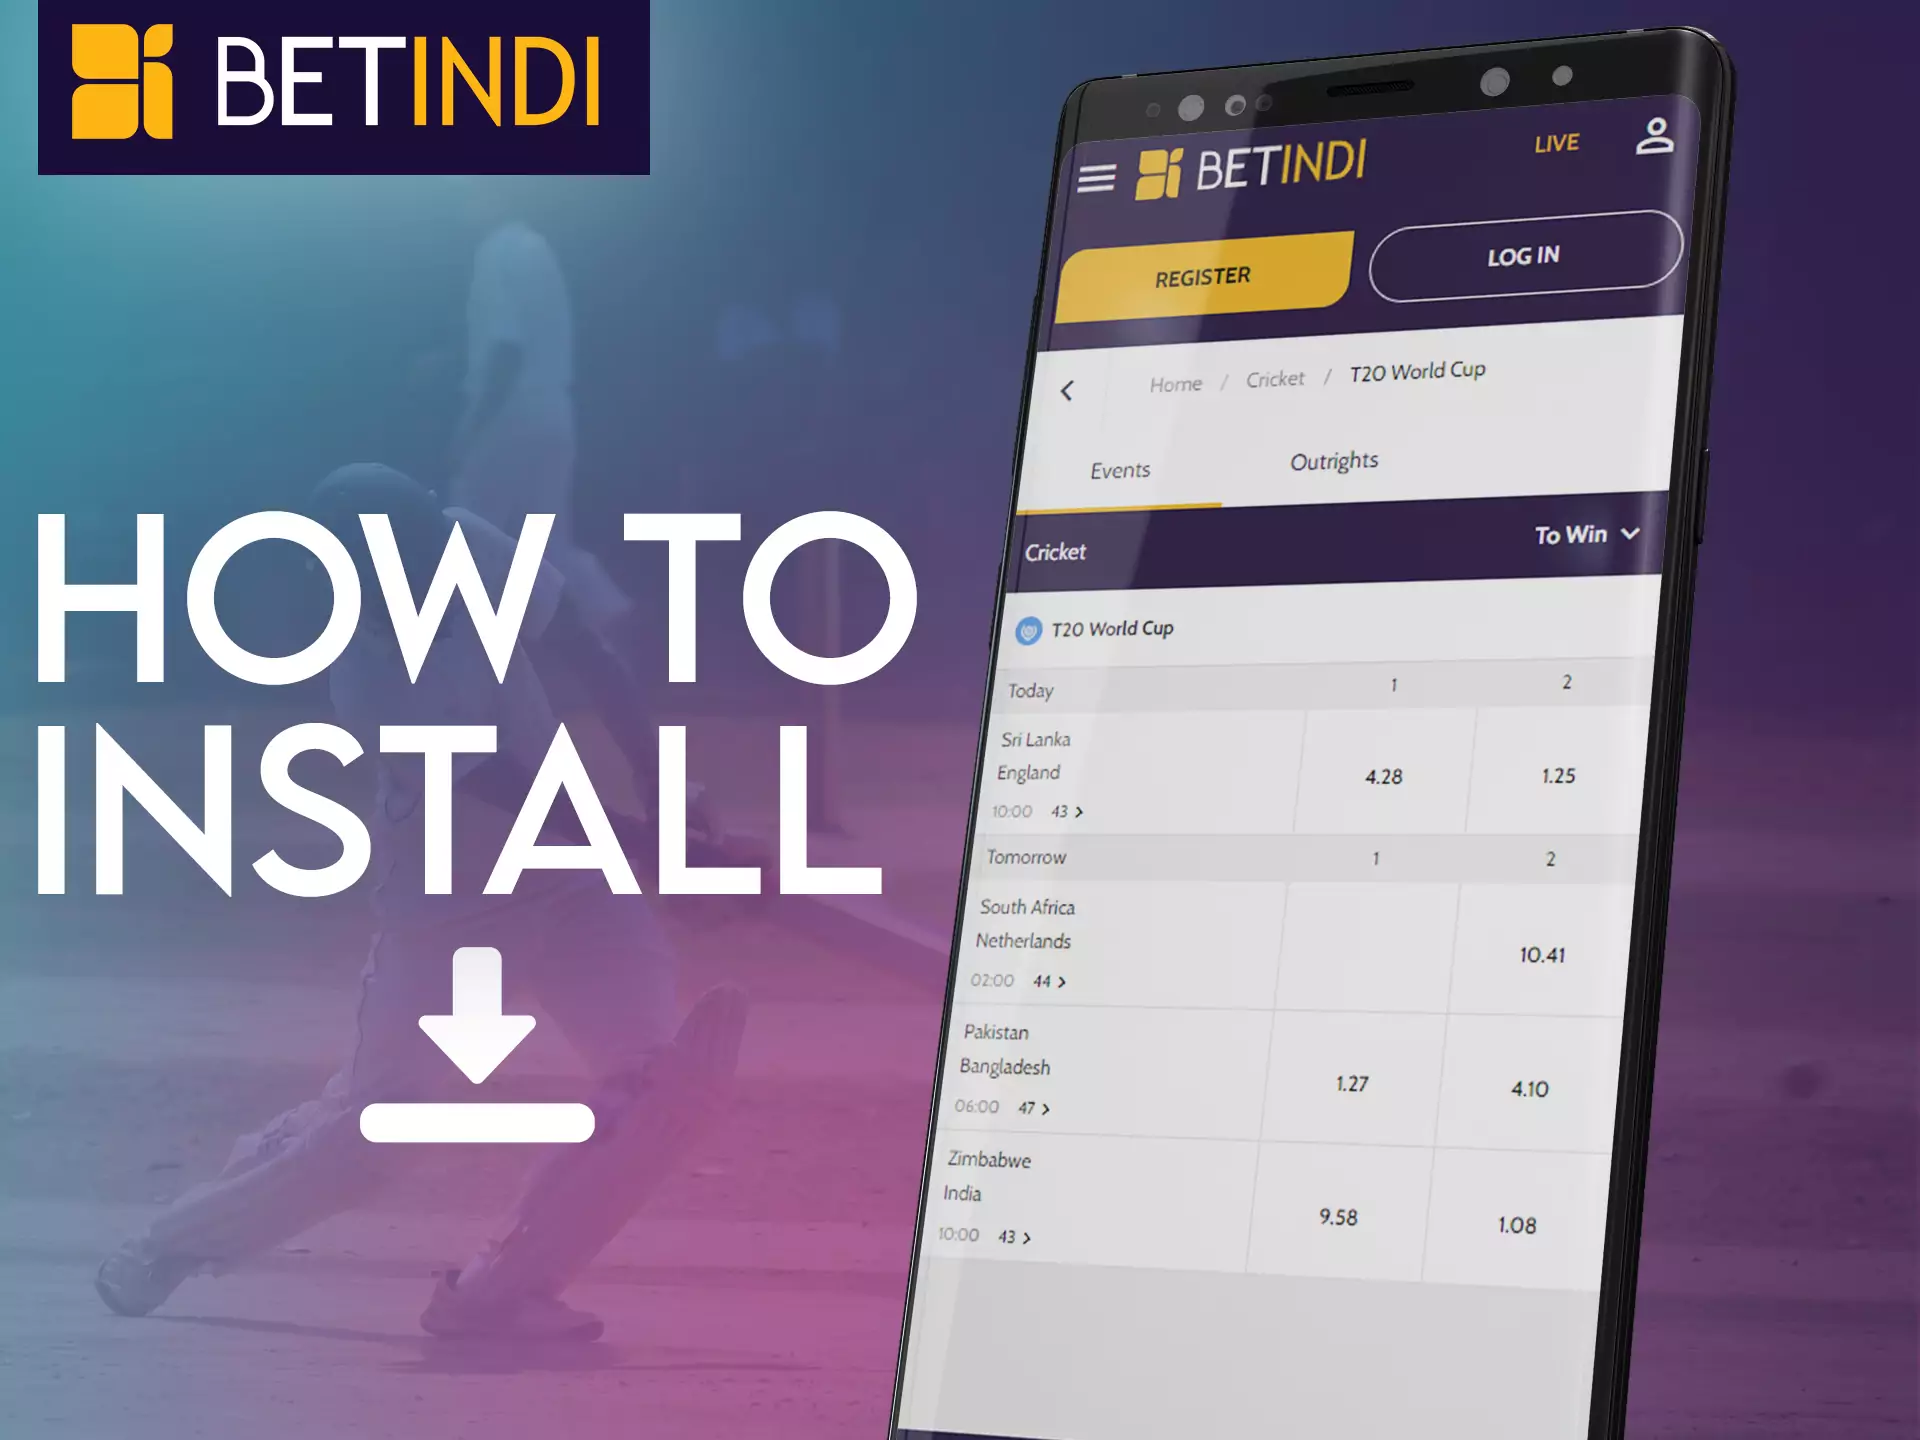 Use this instruction to install the Betindi app.